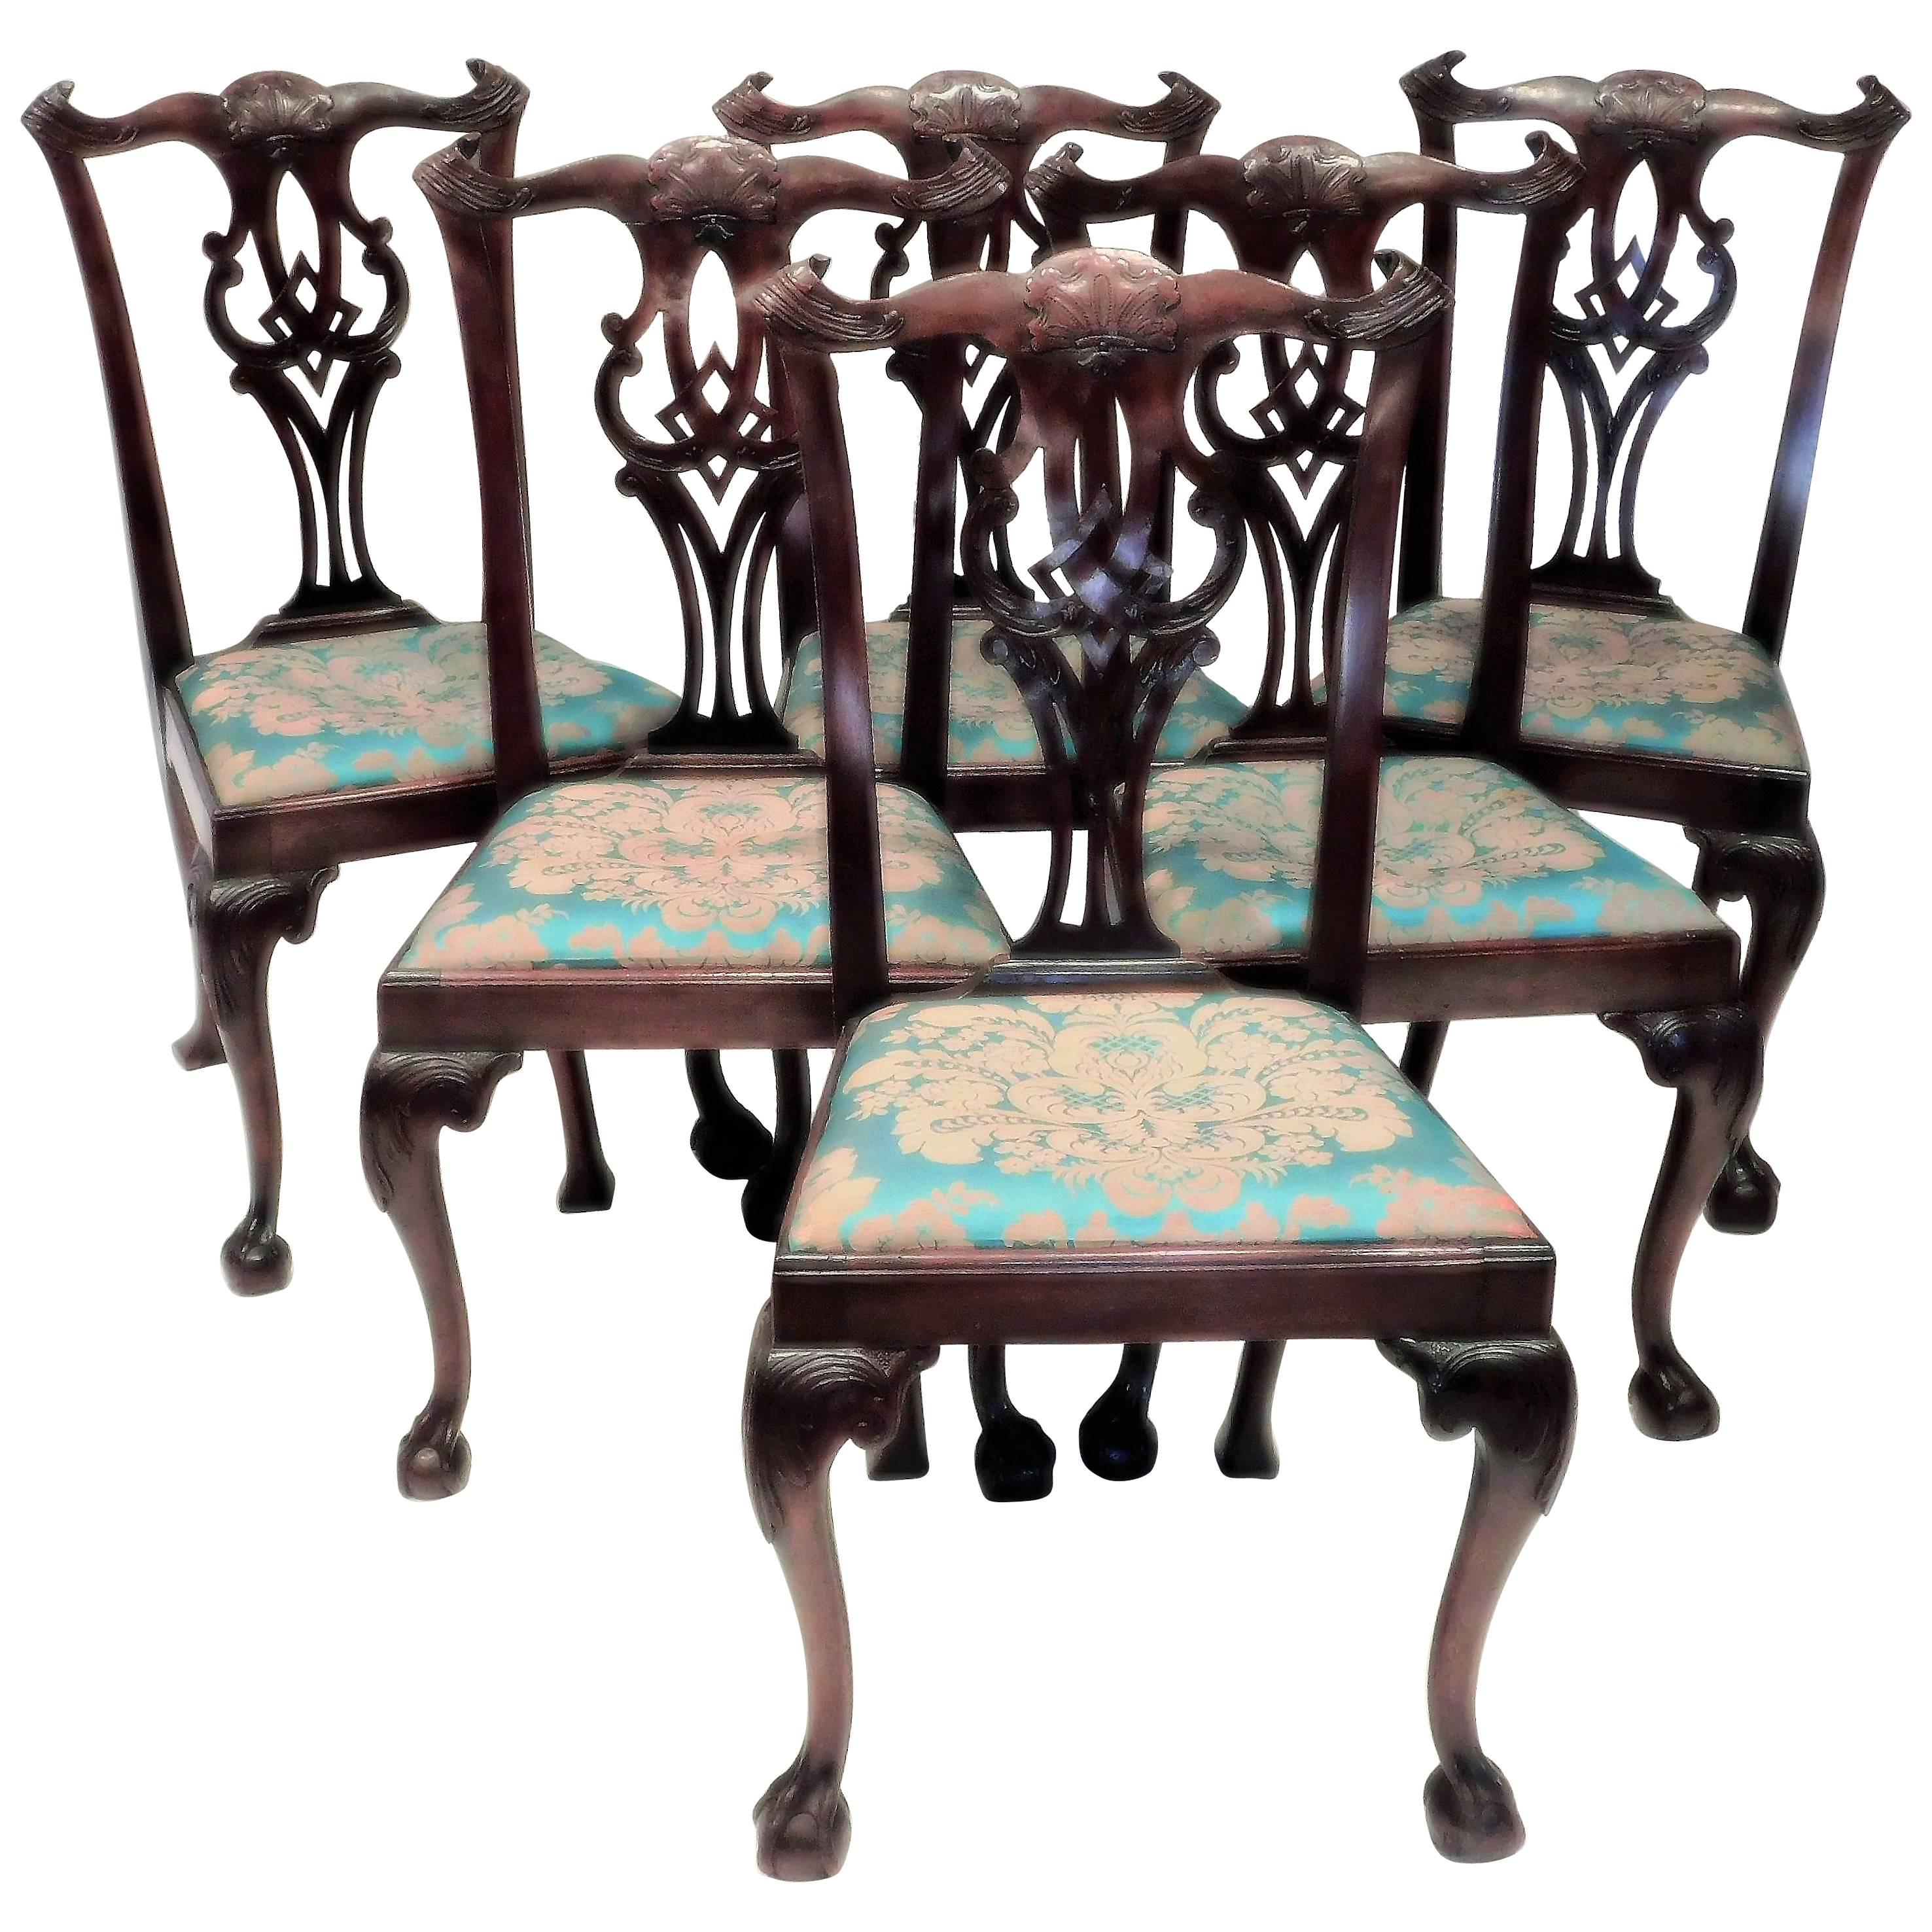 Set of Six Chippendale Style Chairs, circa 1795